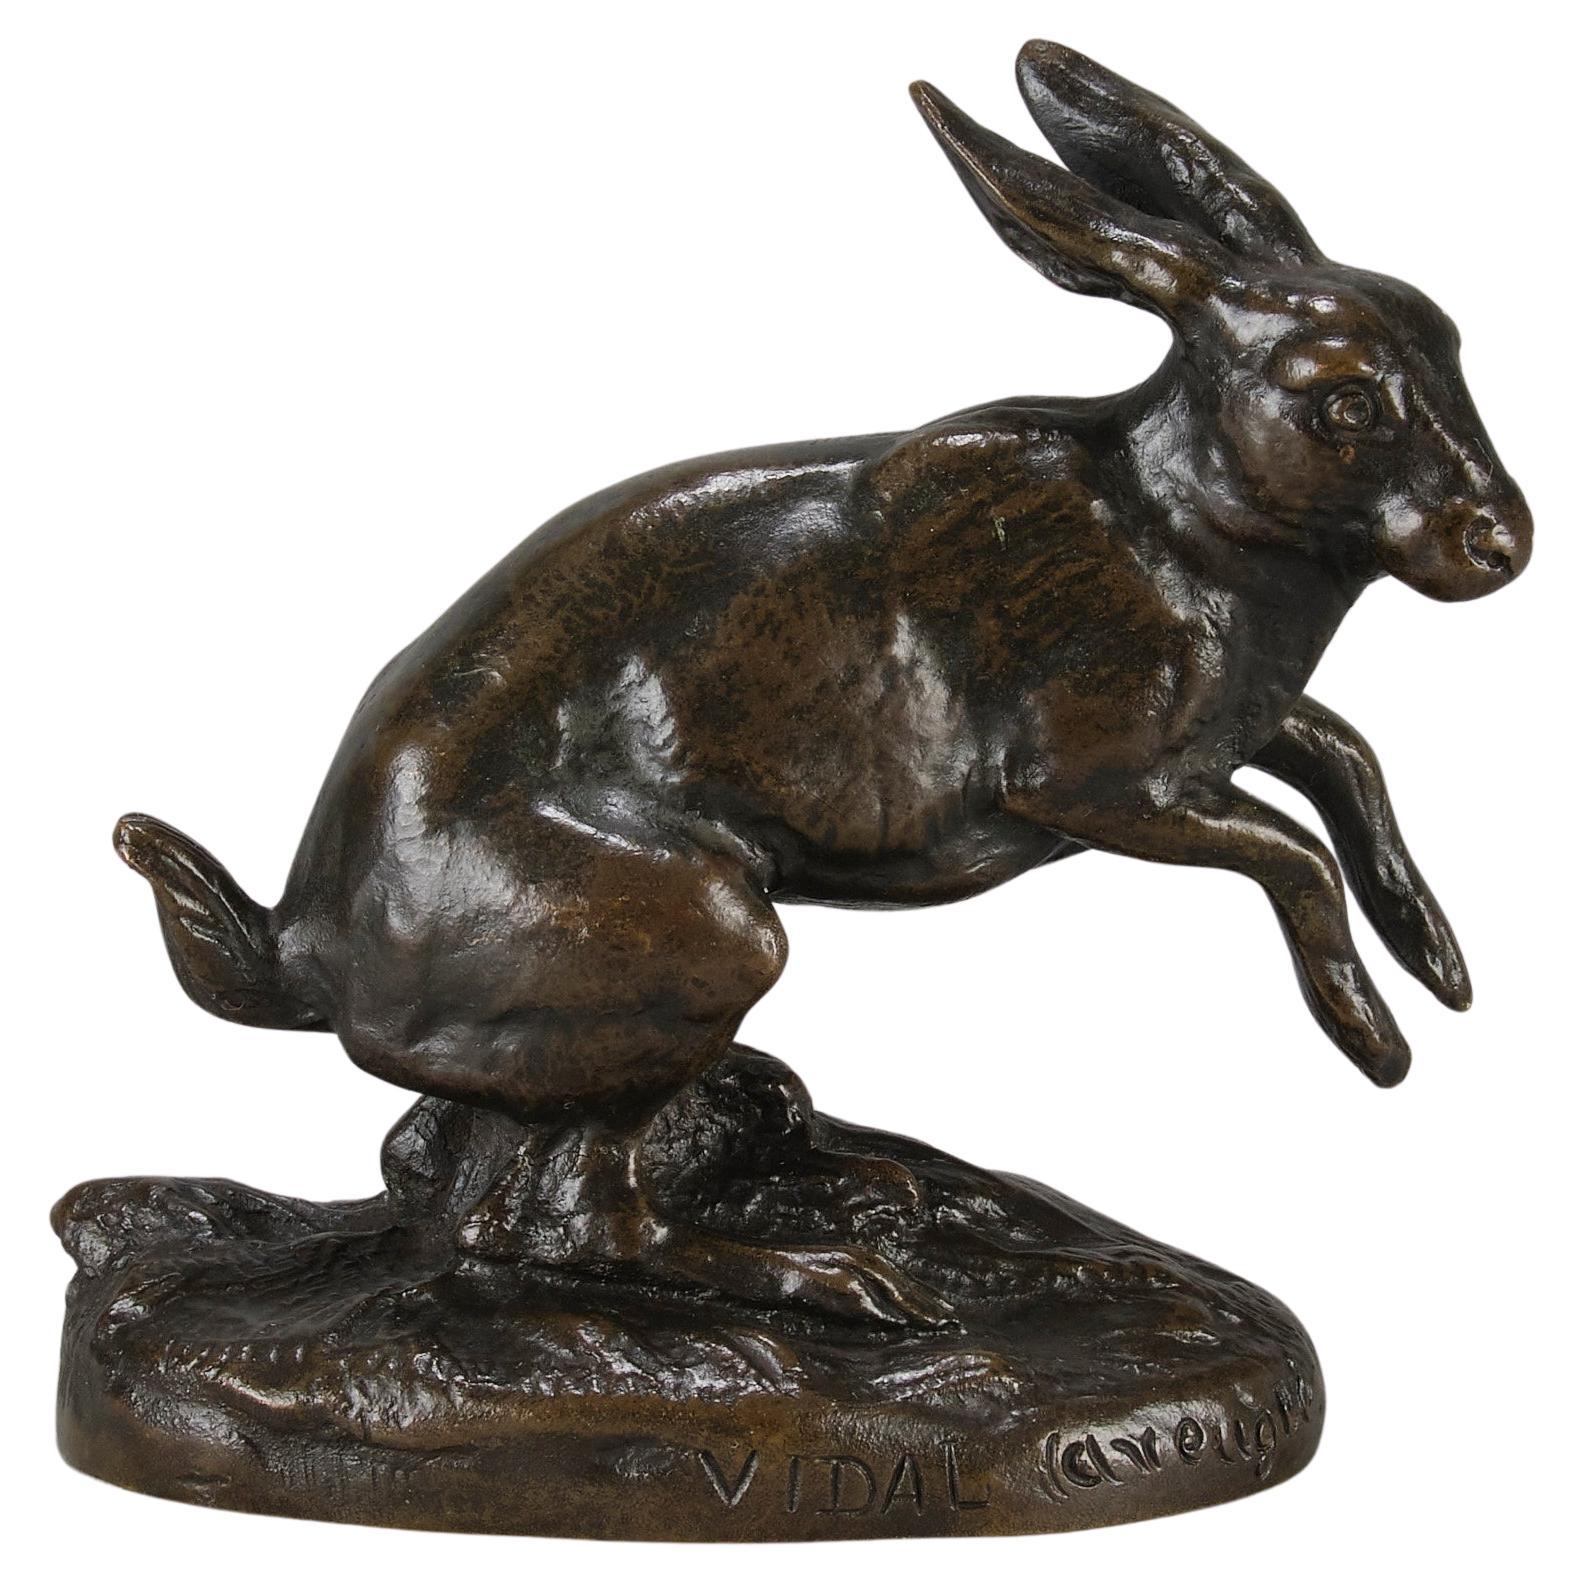 Mid 19th Century Animalier Bronze entitled "Leaping Hare" by Louis Vidal For Sale